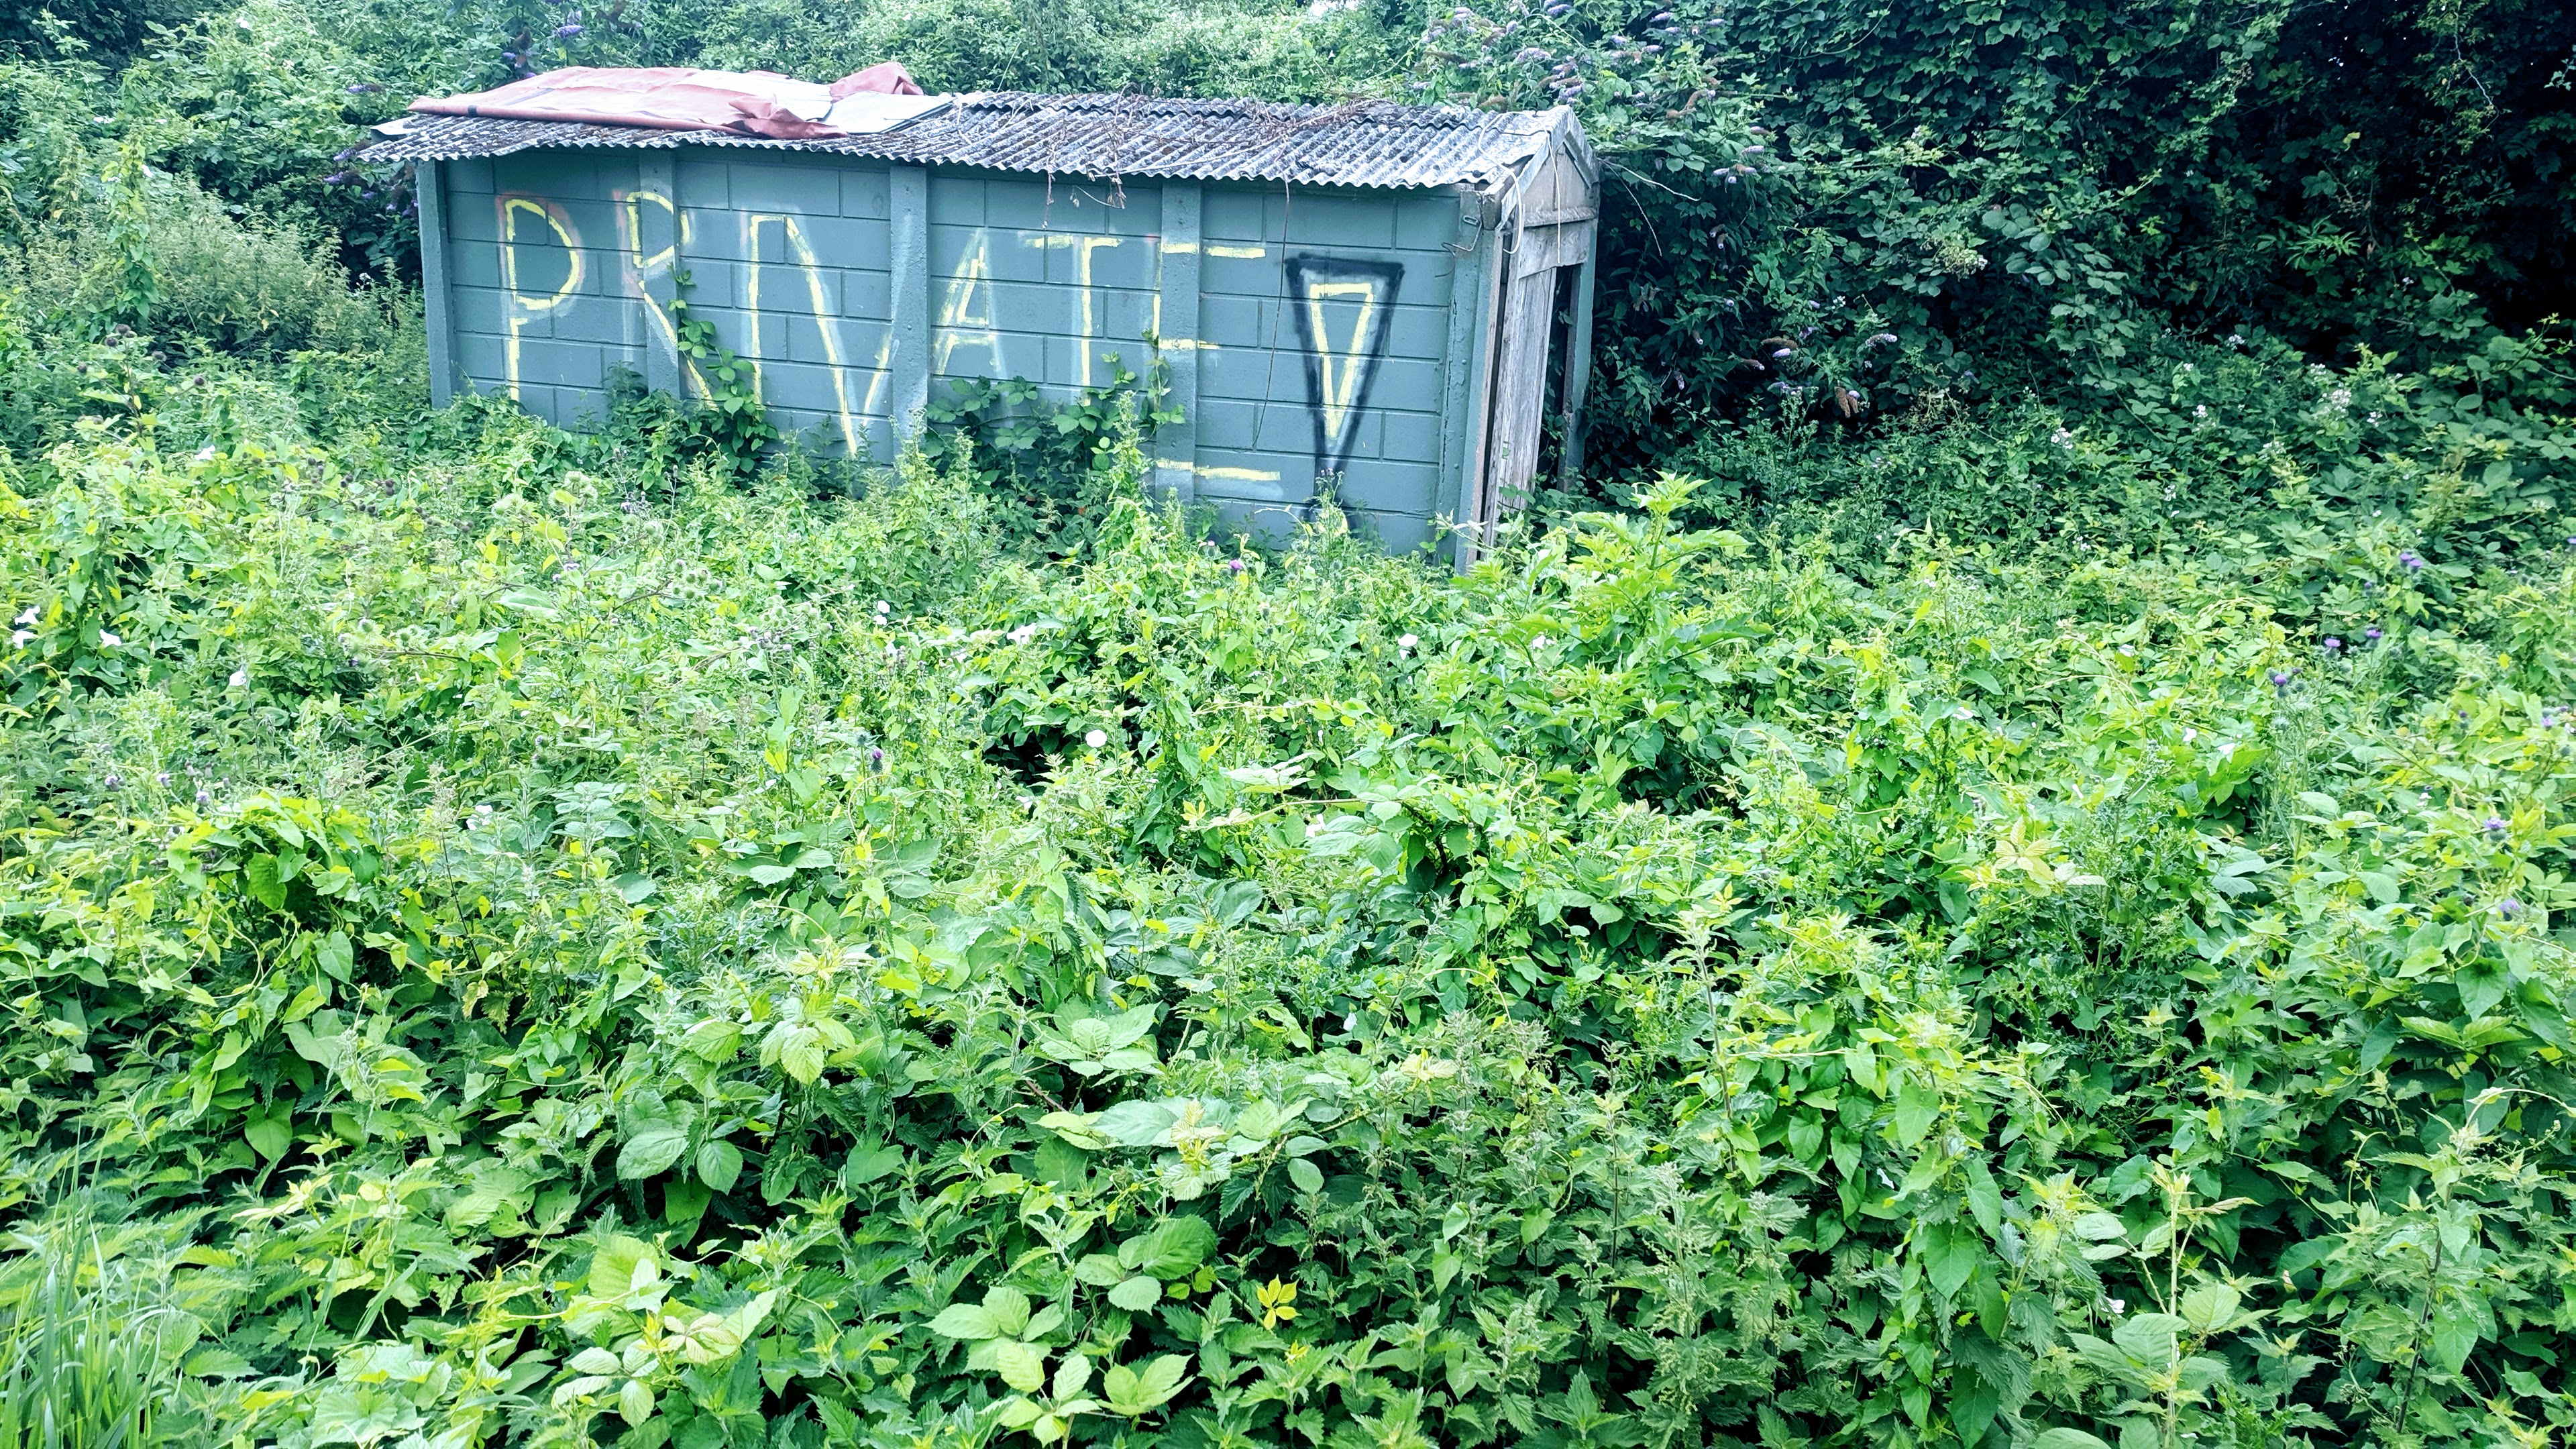 'Private!' sign on a ram shackled shed